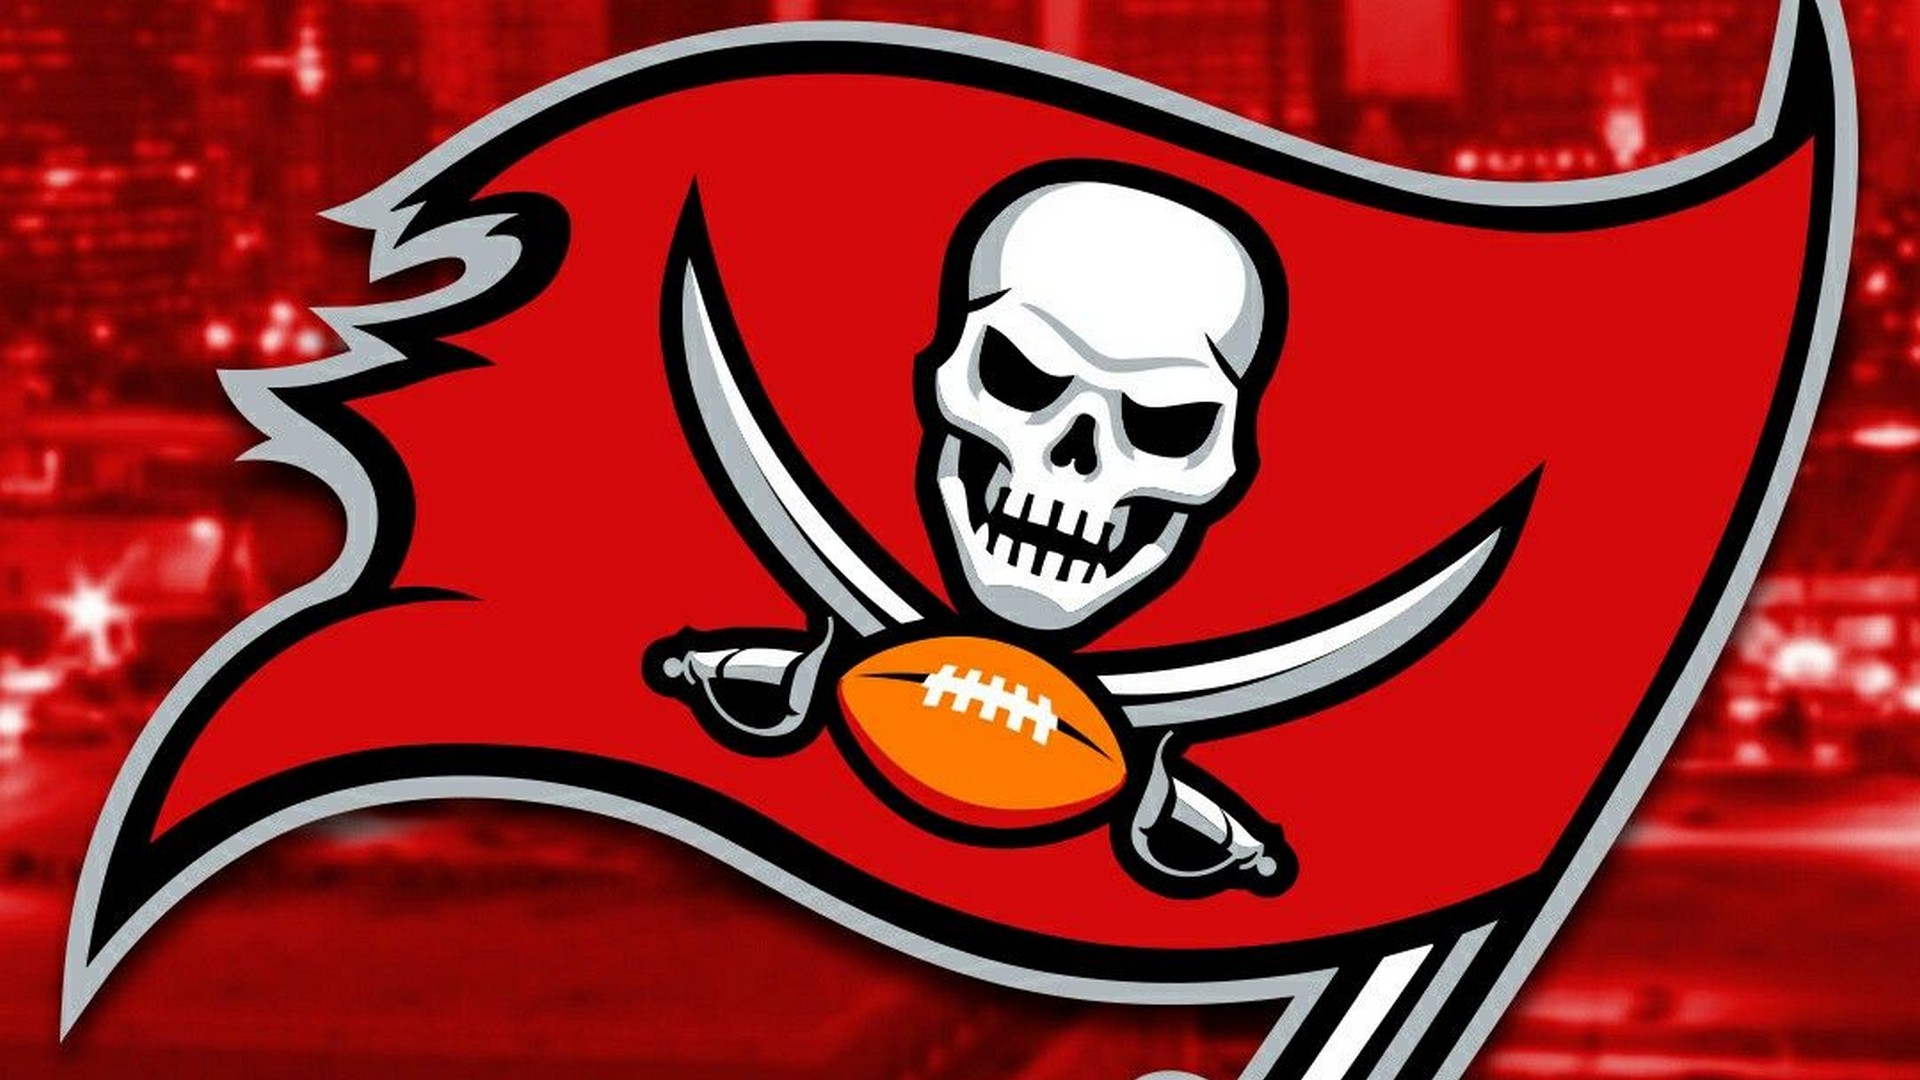 Buccaneers Wallpaper in HD with high-resolution 1920x1080 pixel. Download and set as wallpaper for Desktop Computer, Apple iPhone X, XS Max, XR, 8, 7, 6, SE, iPad, Android